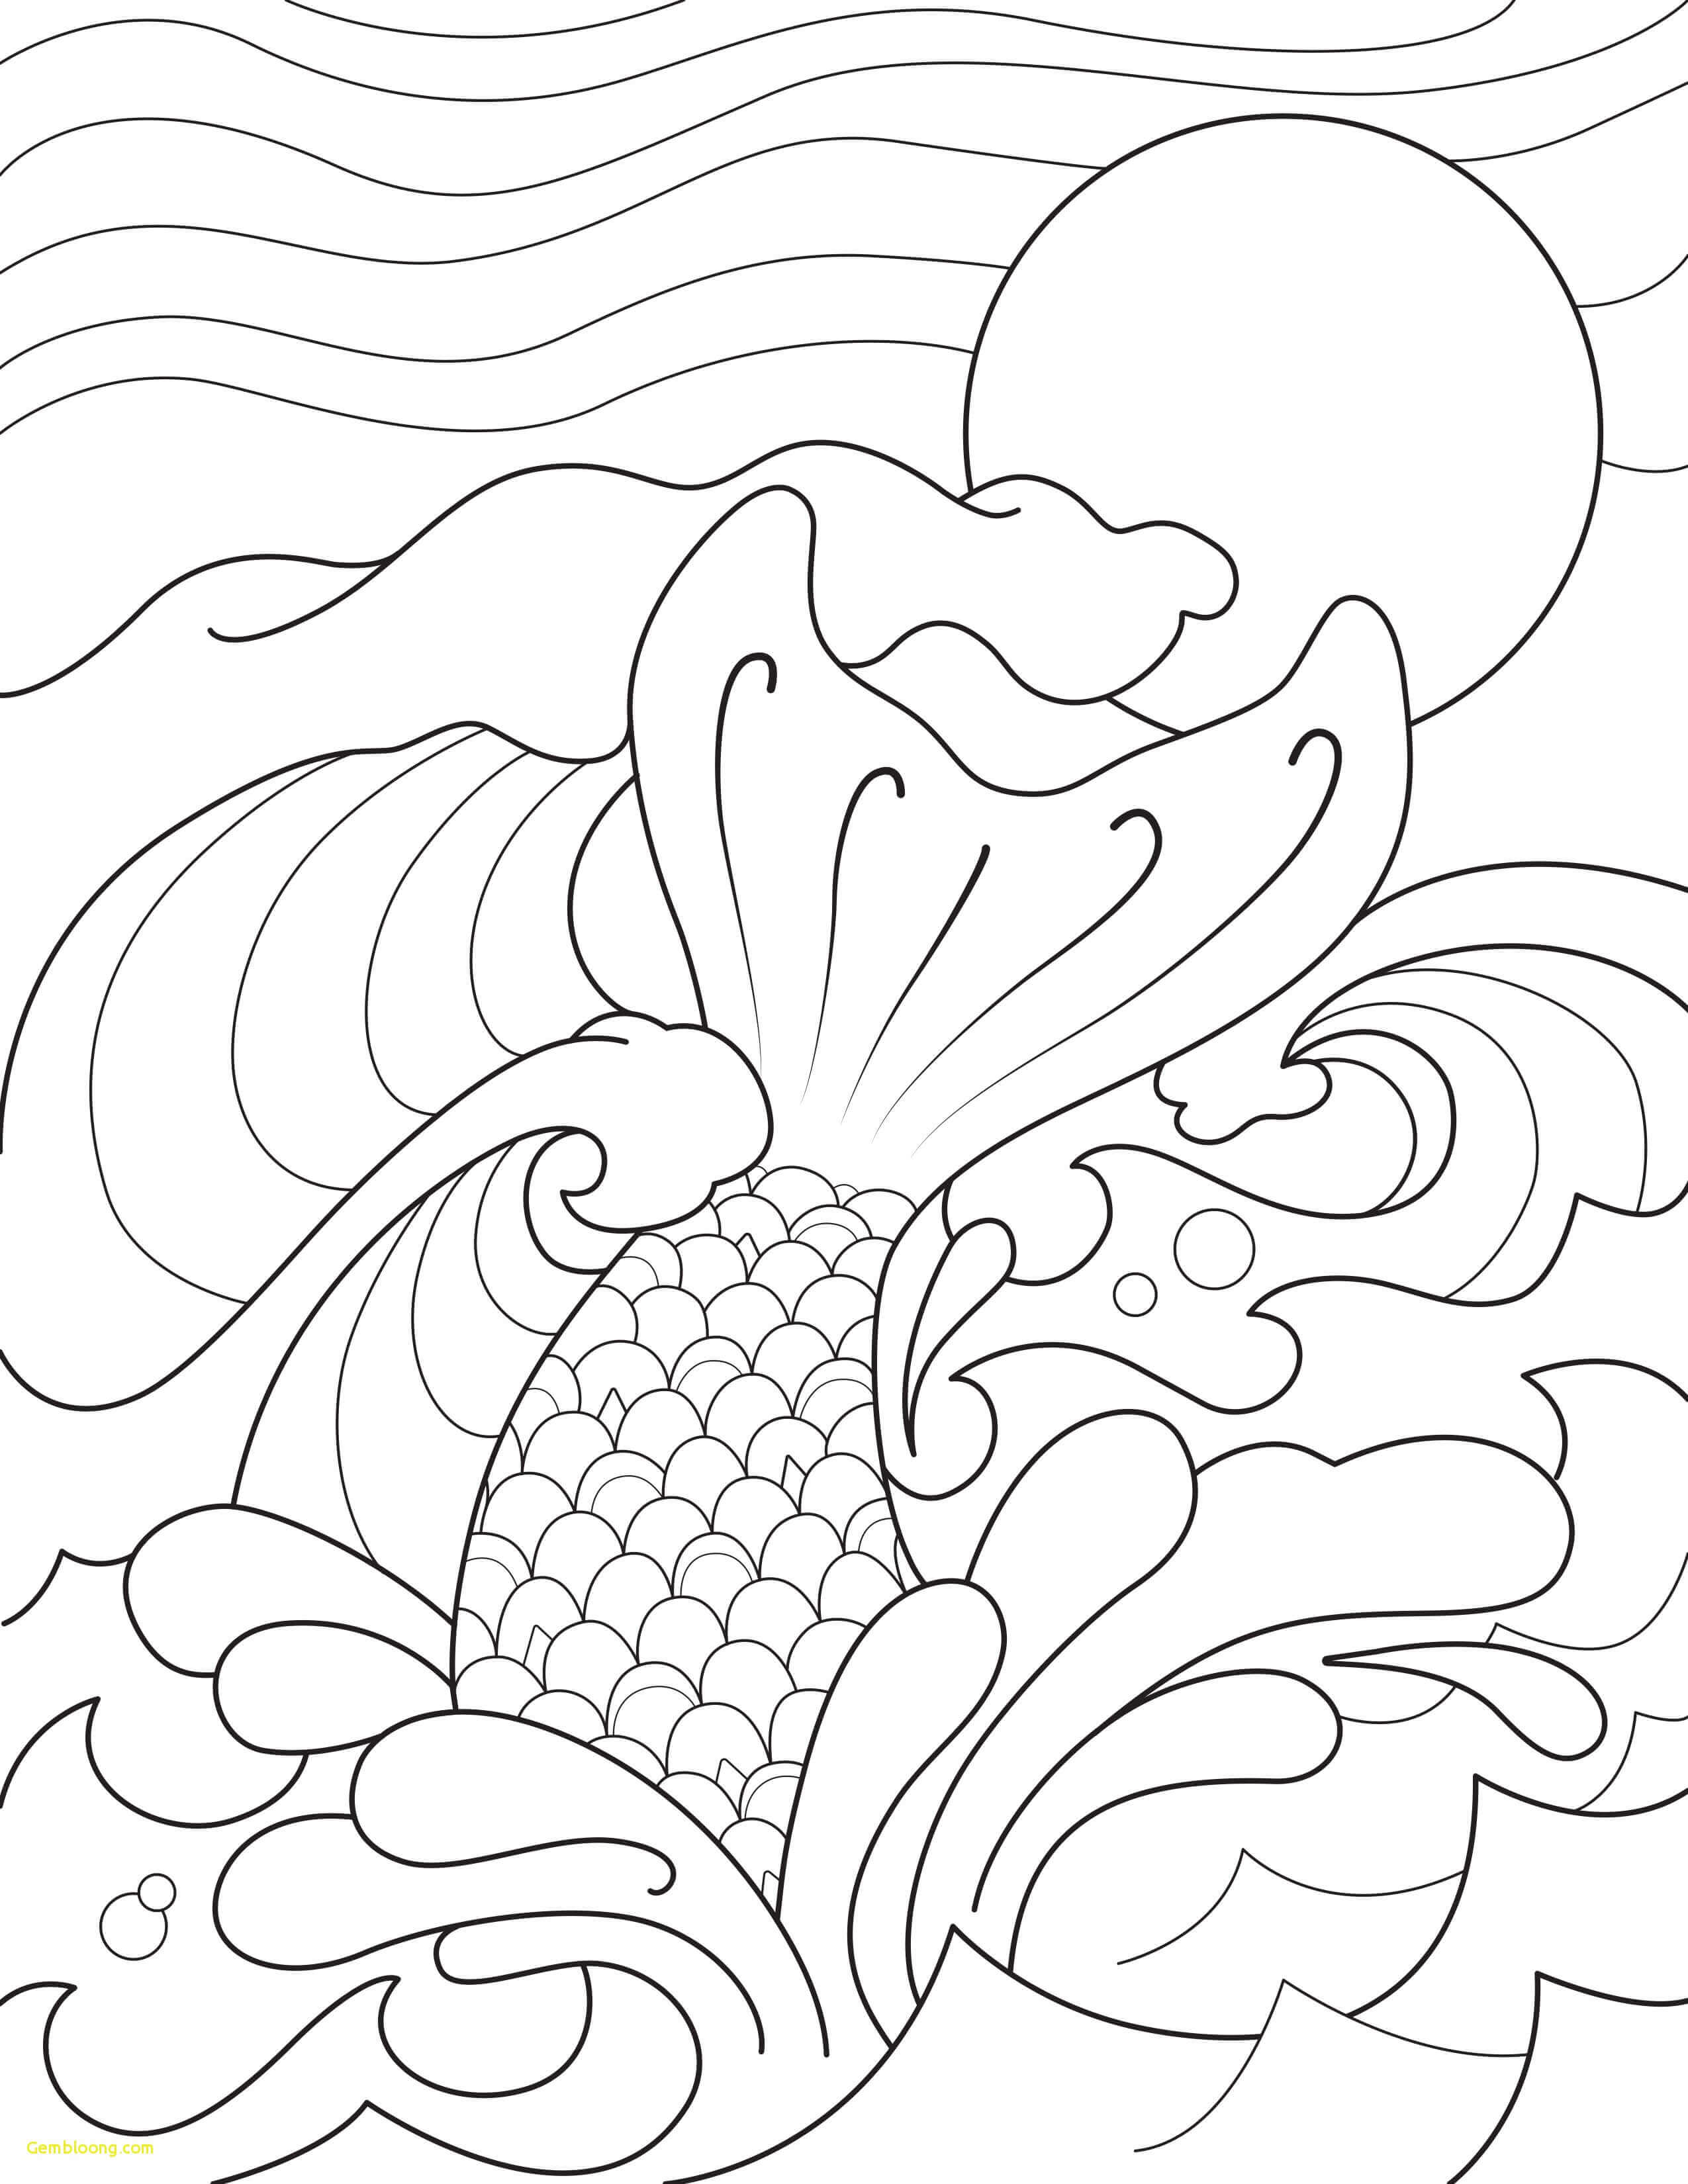 Mermaid Tail Coloring Pages